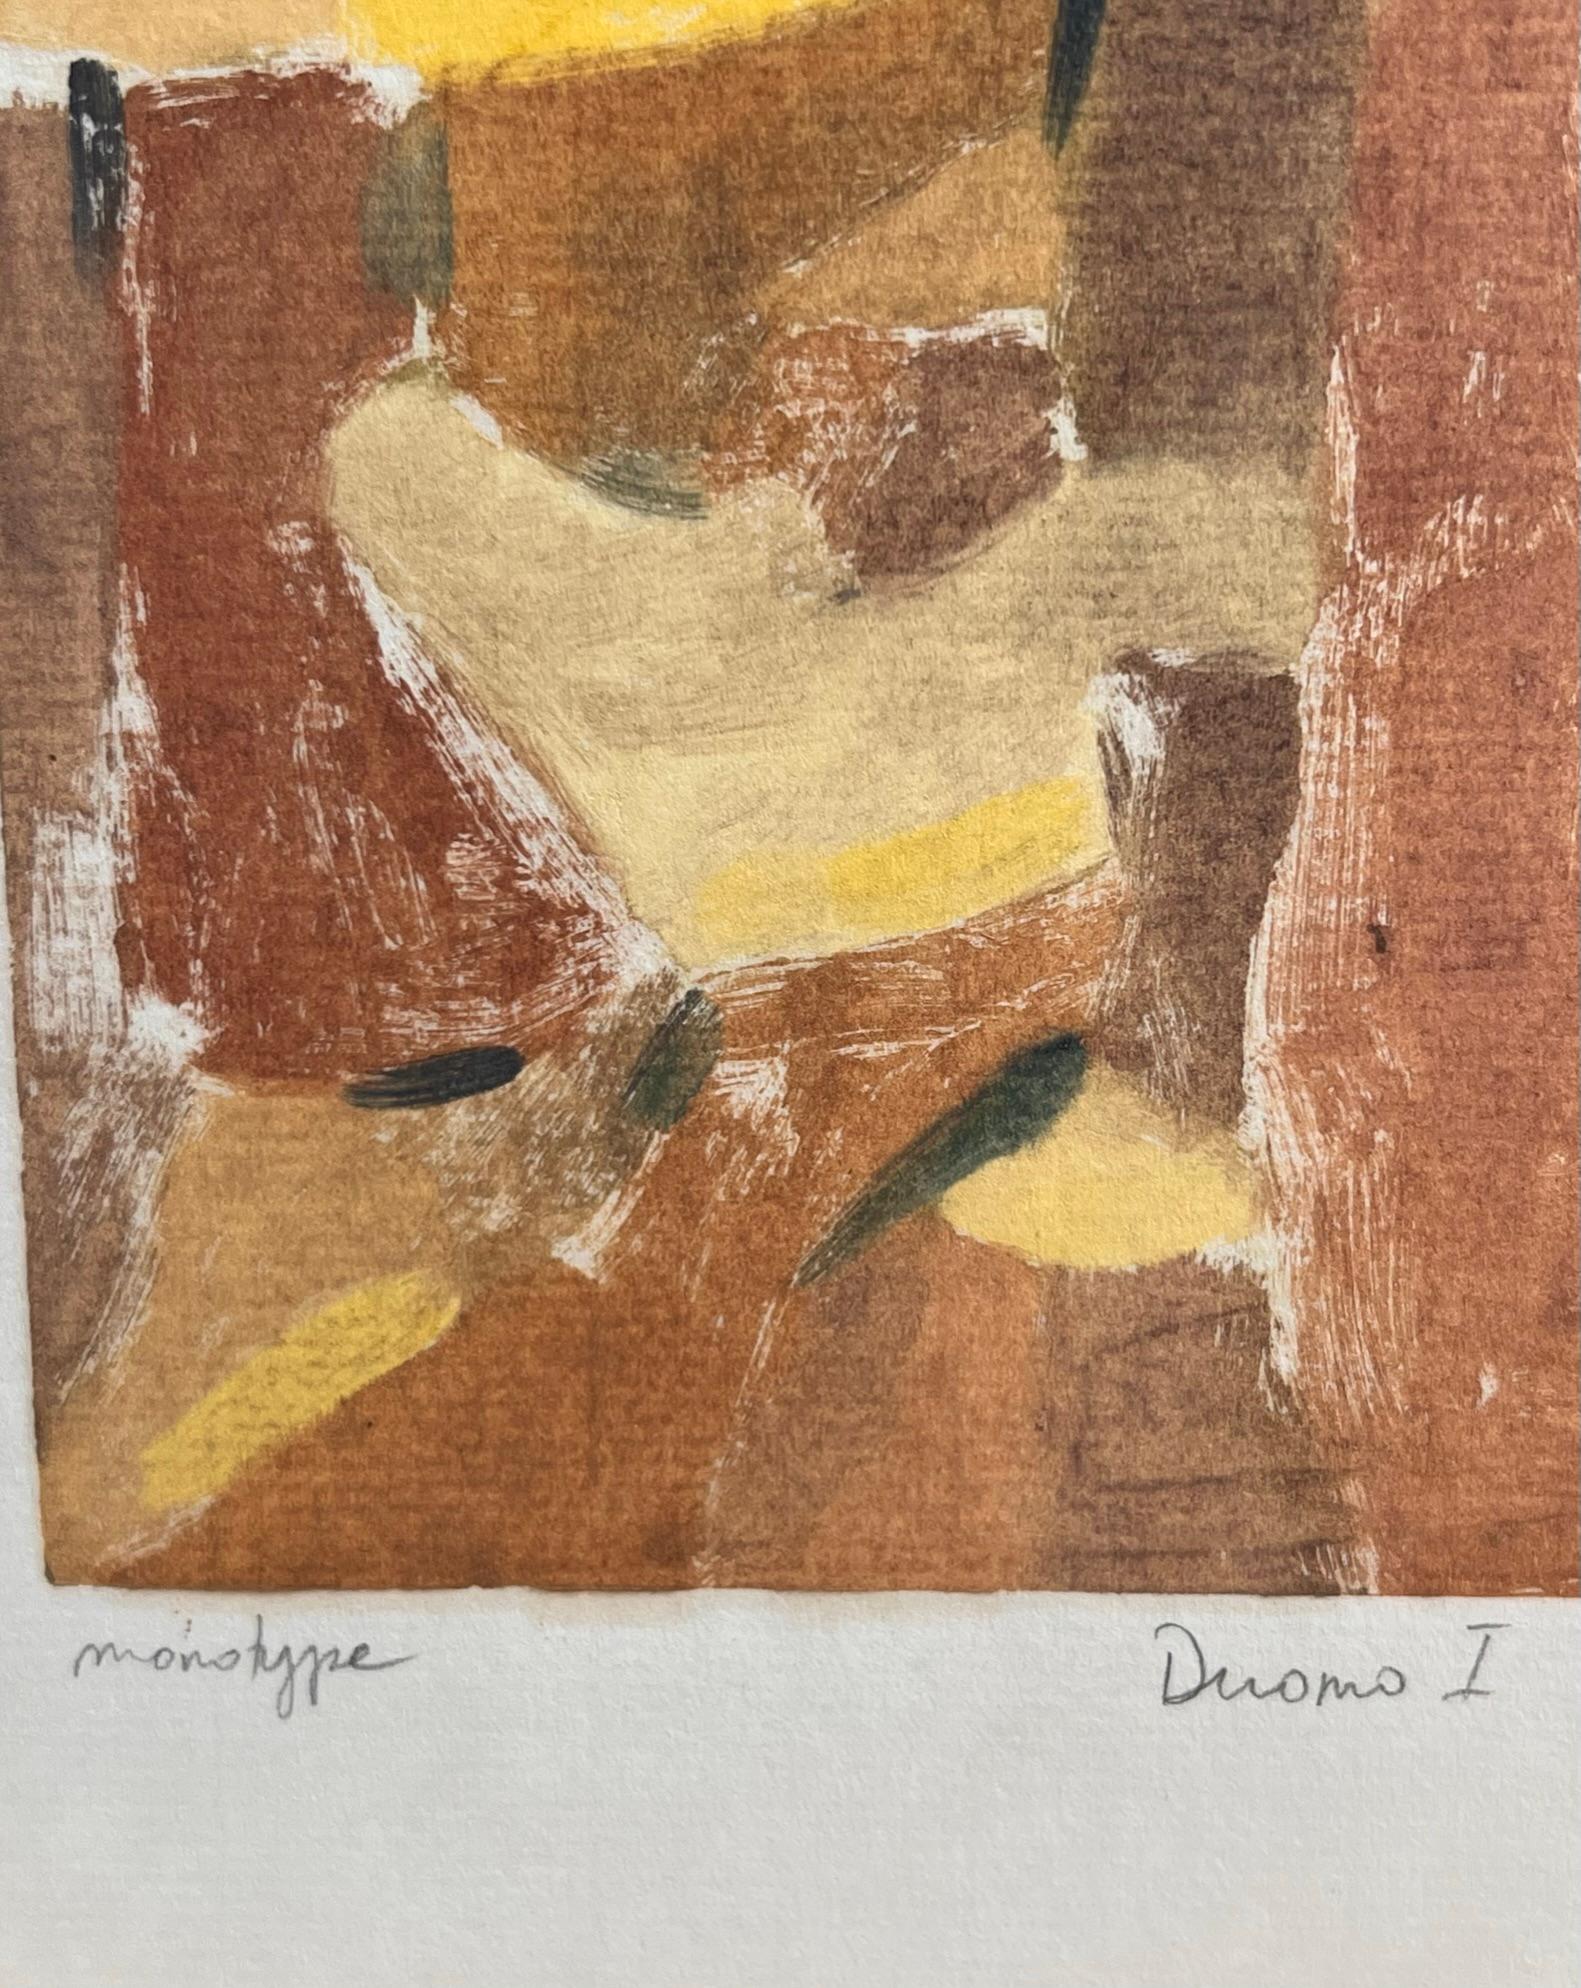 Pair of Original Monotype Etchings of the Duomo, Signed by Artist, 1981 For Sale 8